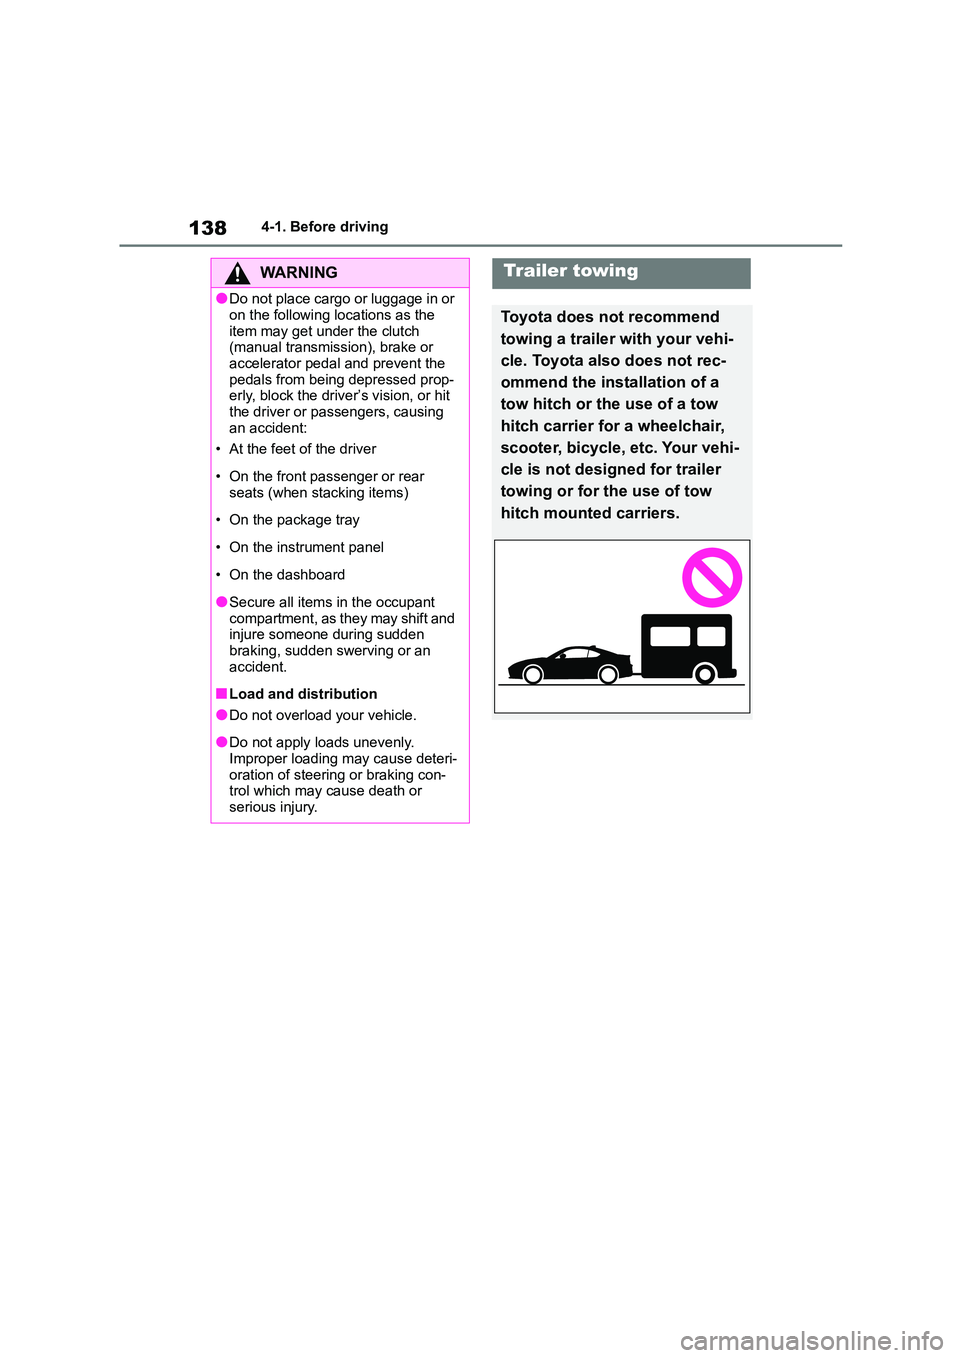 TOYOTA GR86 2022  Owners Manual (in English) 1384-1. Before driving
WA R N I N G
●Do not place cargo or luggage in or  
on the following locations as the 
item may get under the clutch  (manual transmission), brake or  
accelerator pedal and p